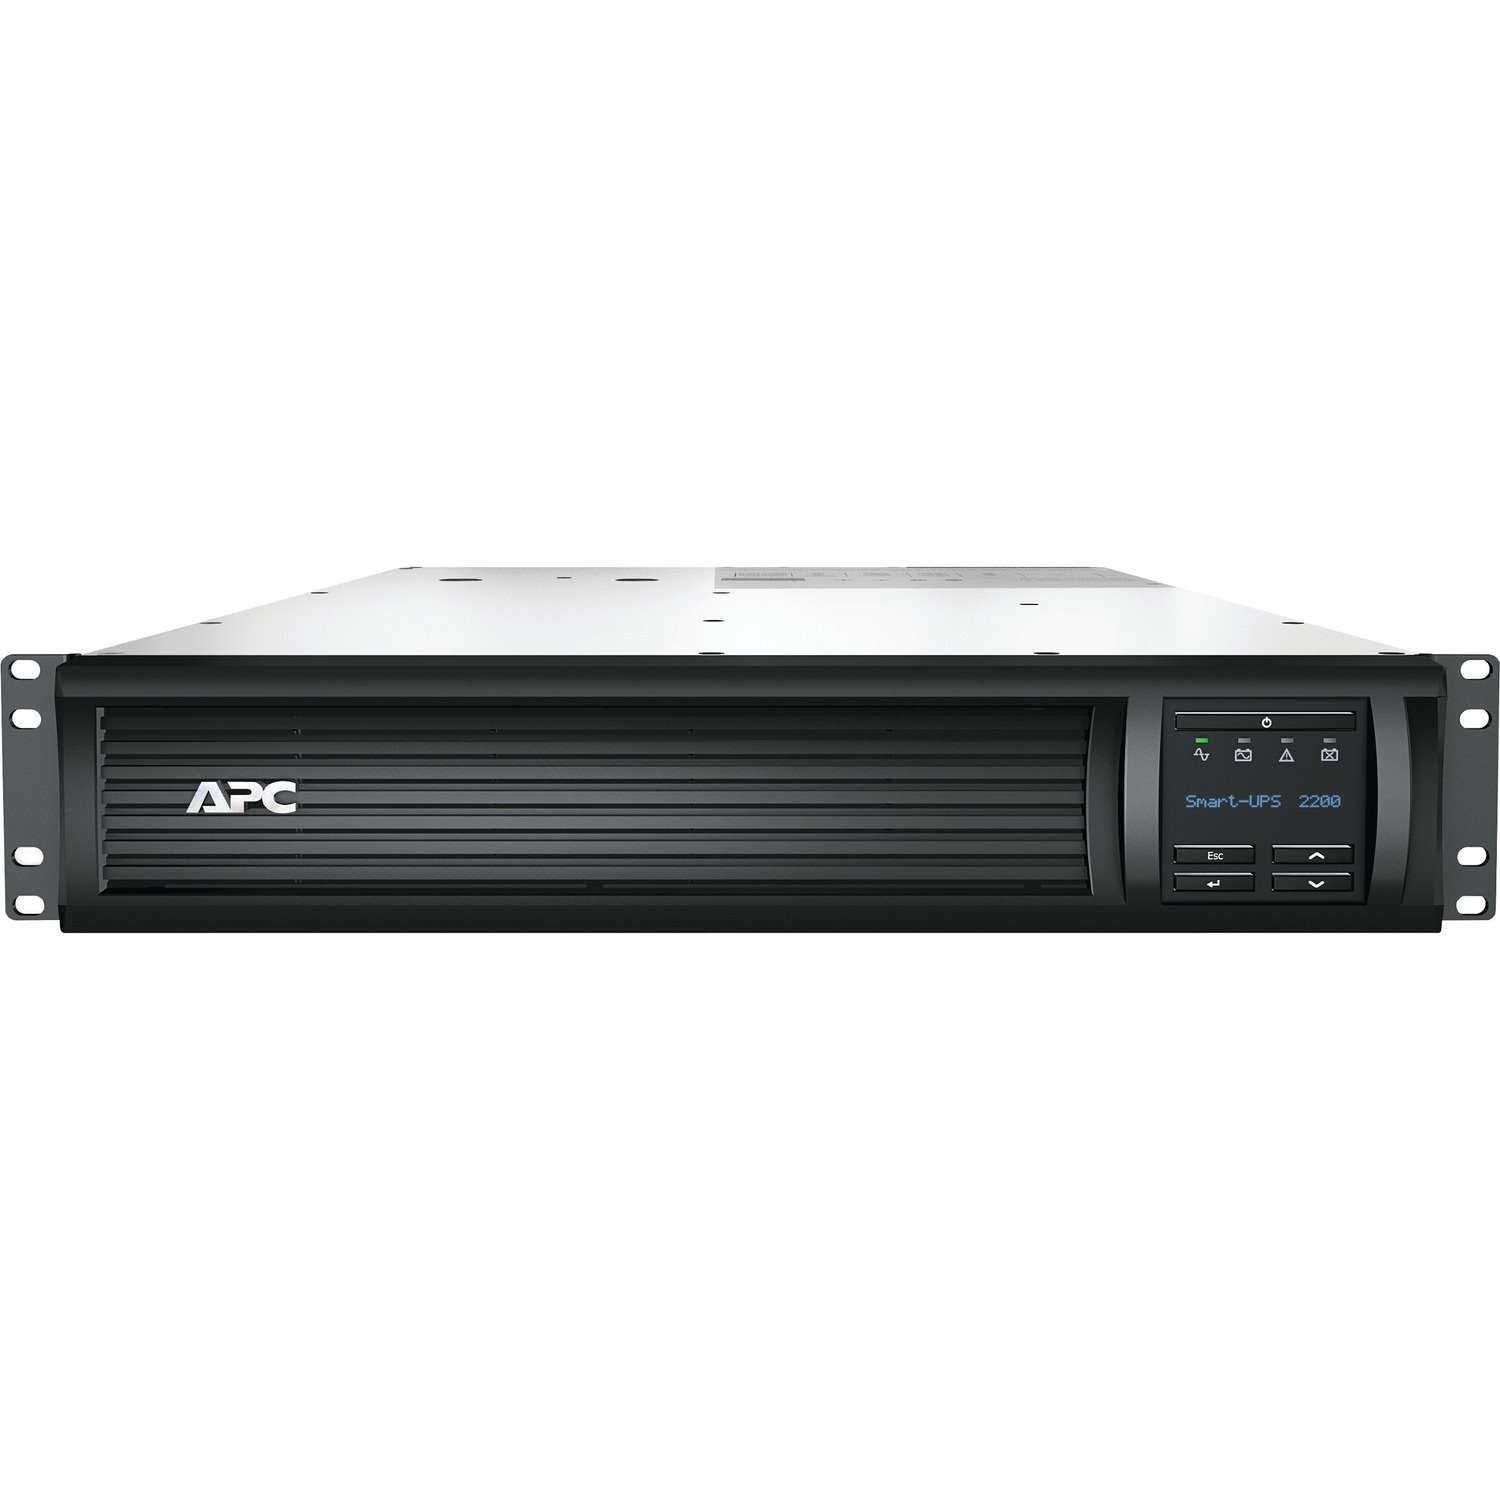 SMT2200RMI2UC- APC by Schneider Electric Smart-UPS Line-interactive UPS - 2.20 kVA/1.98 kW. Includes 3 Years Parts Warranty, Smart Connect Cloud Monitoring & Rack Mounting Kit